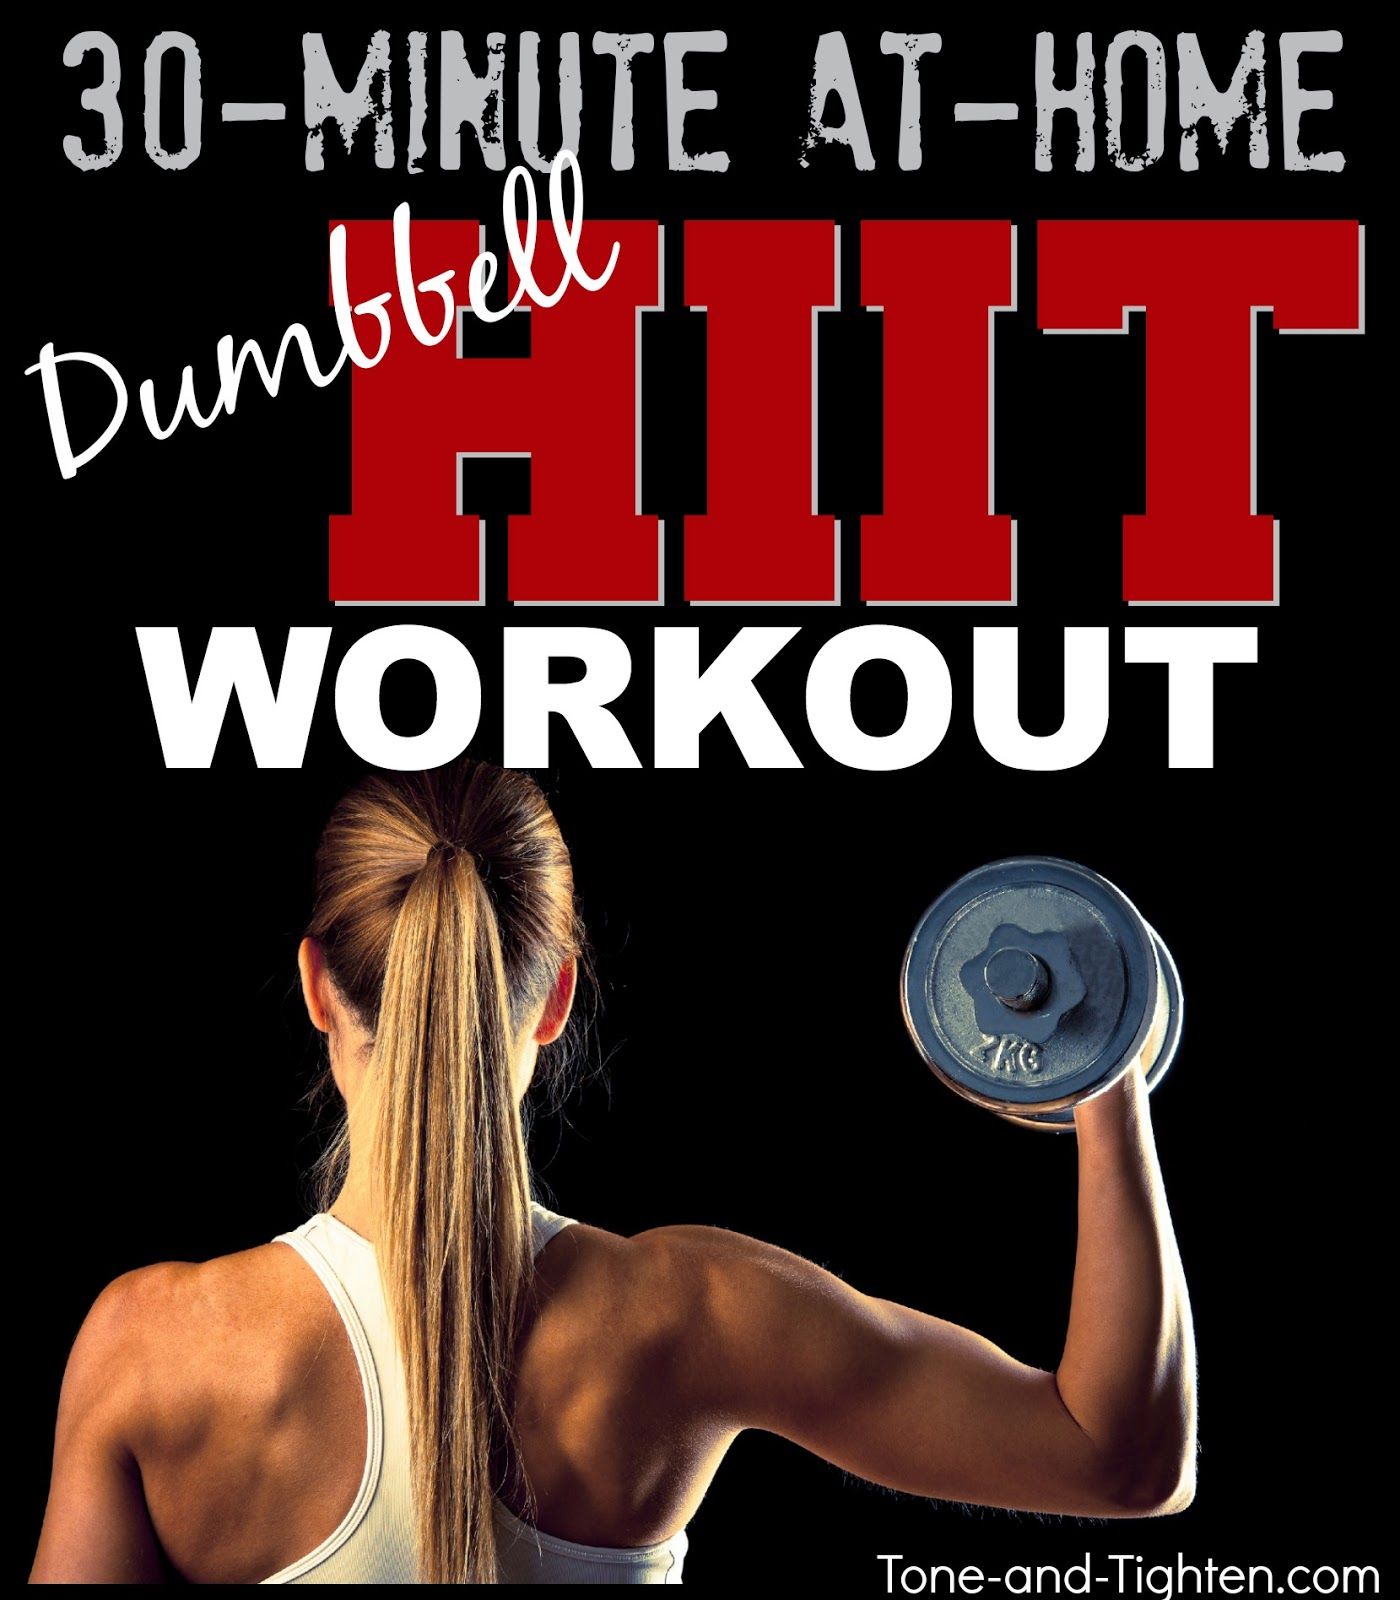 hiit workout example at home